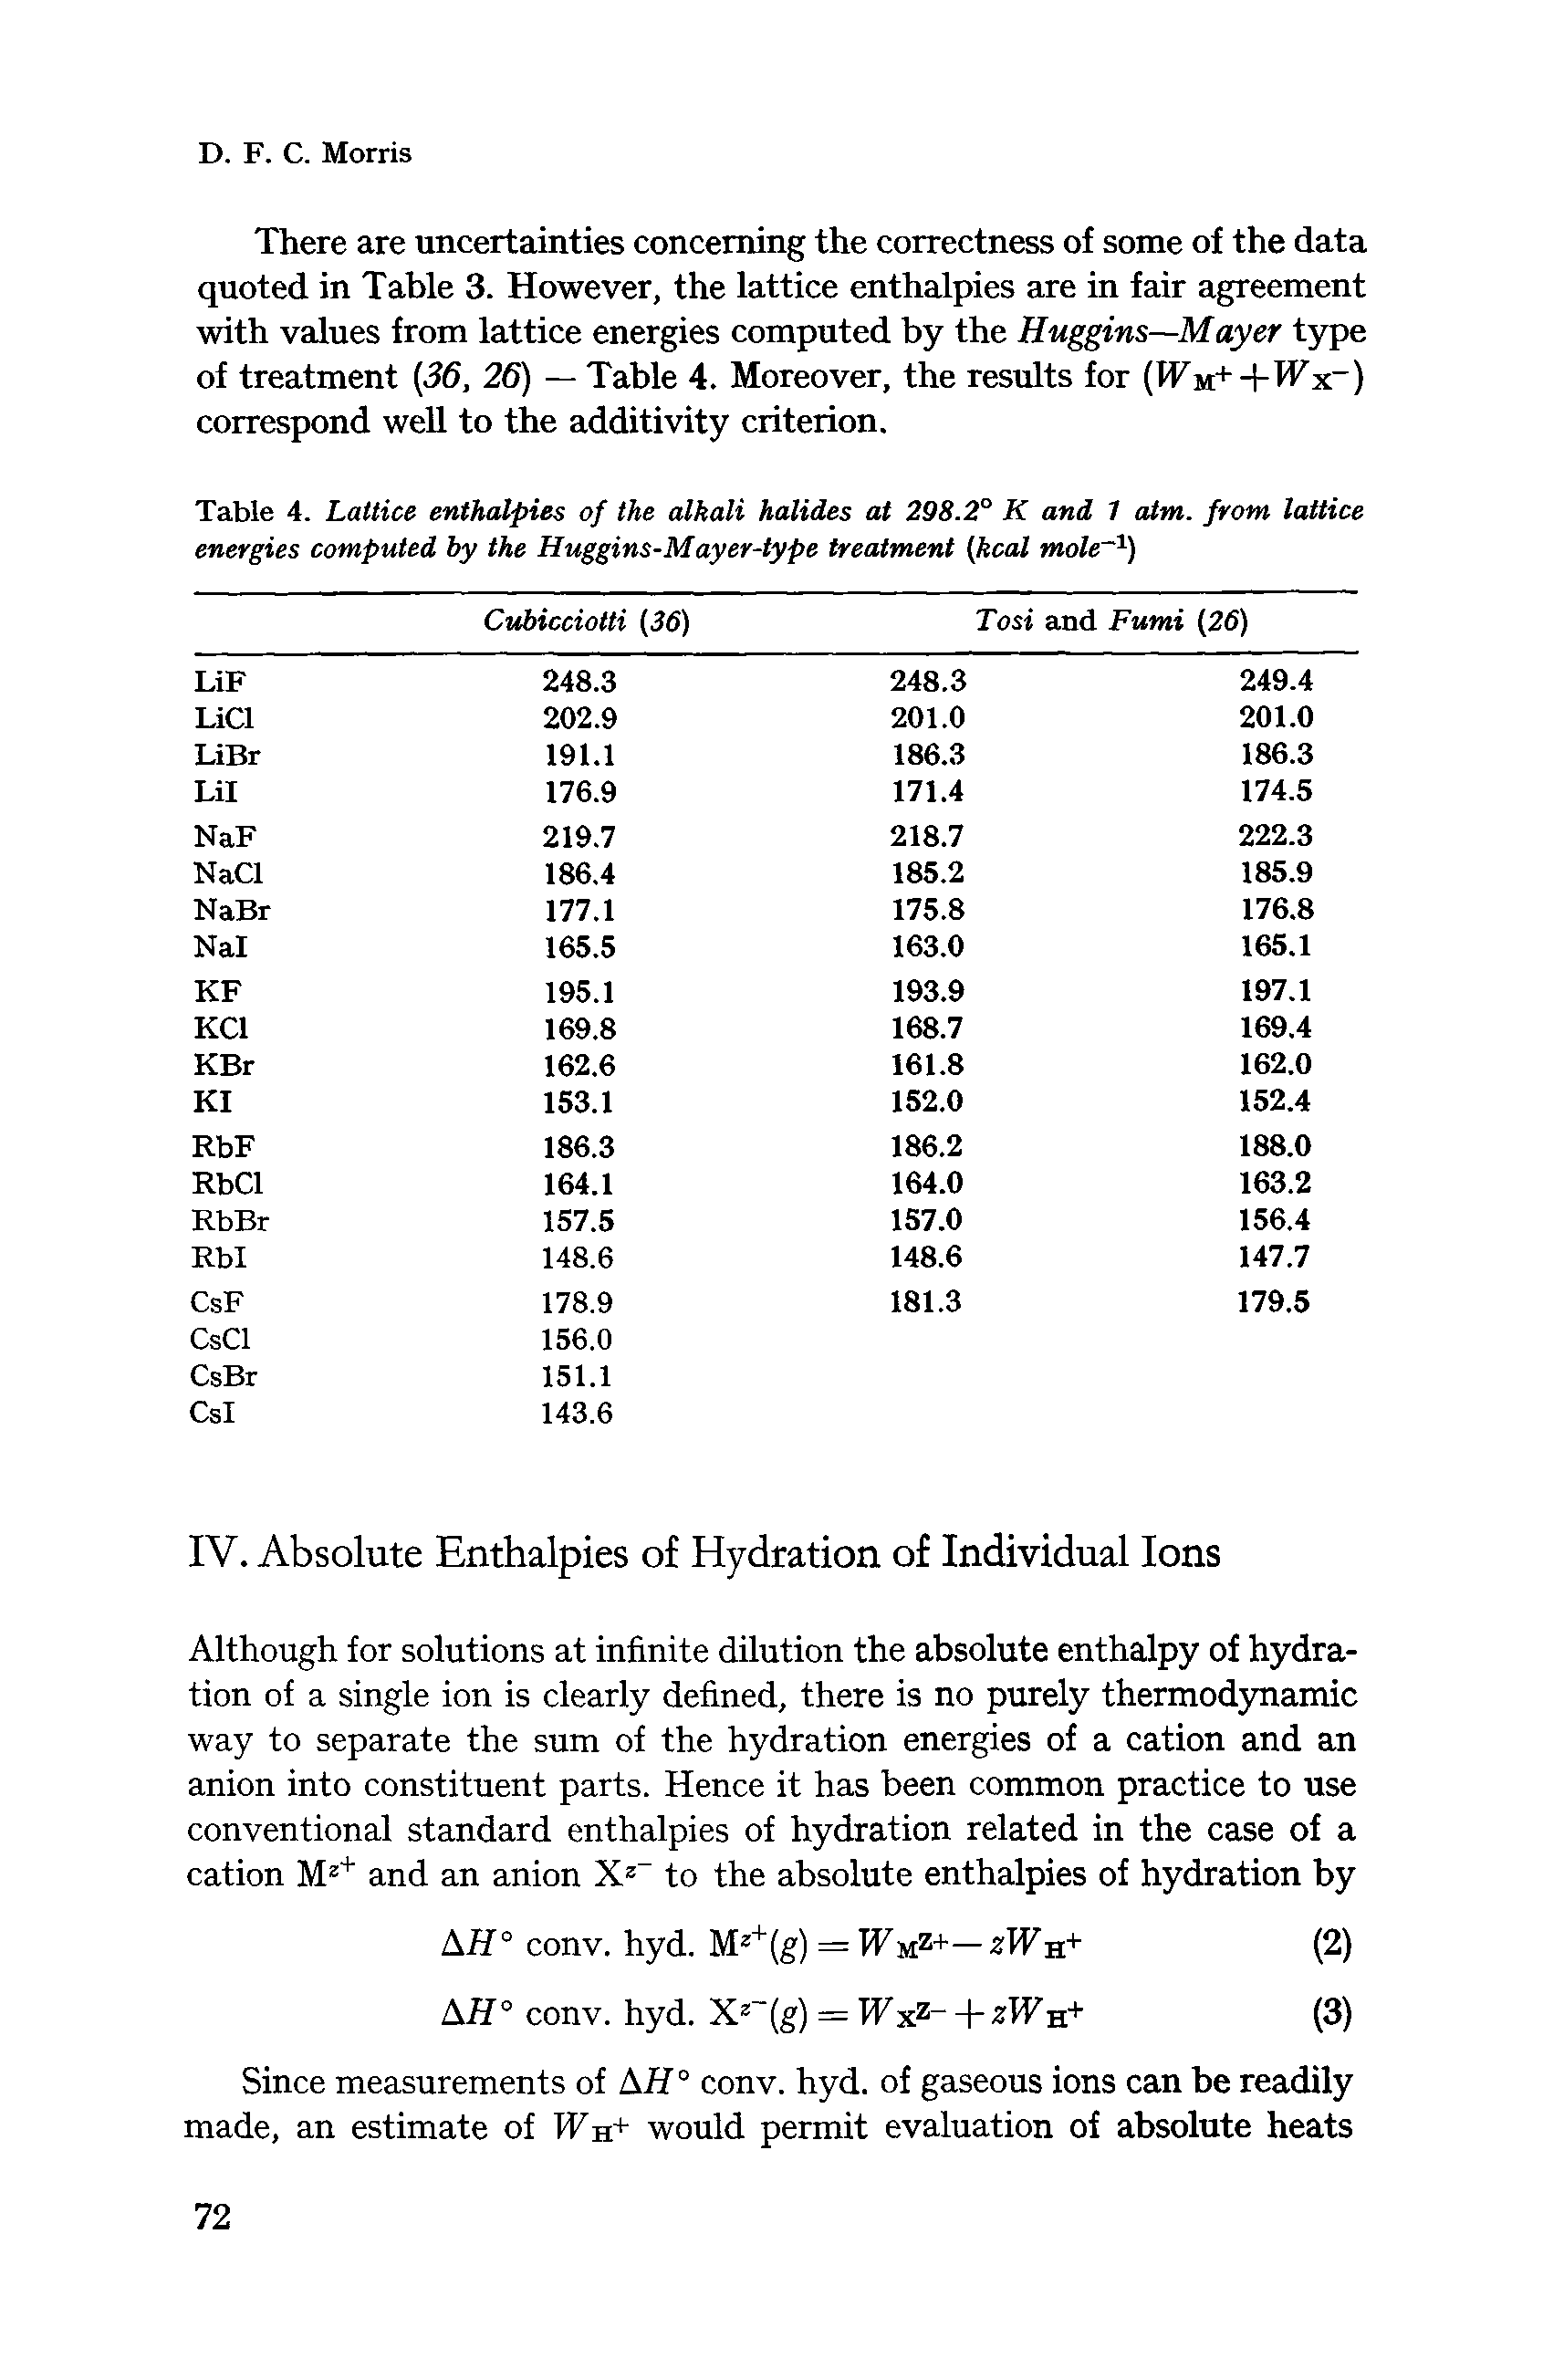 Table 4. Lattice enthalpies of the alkali halides at 298.2° K and 1 aim. from lattice energies computed by the Huggins-Mayer-type treatment (kcal mole-1)...